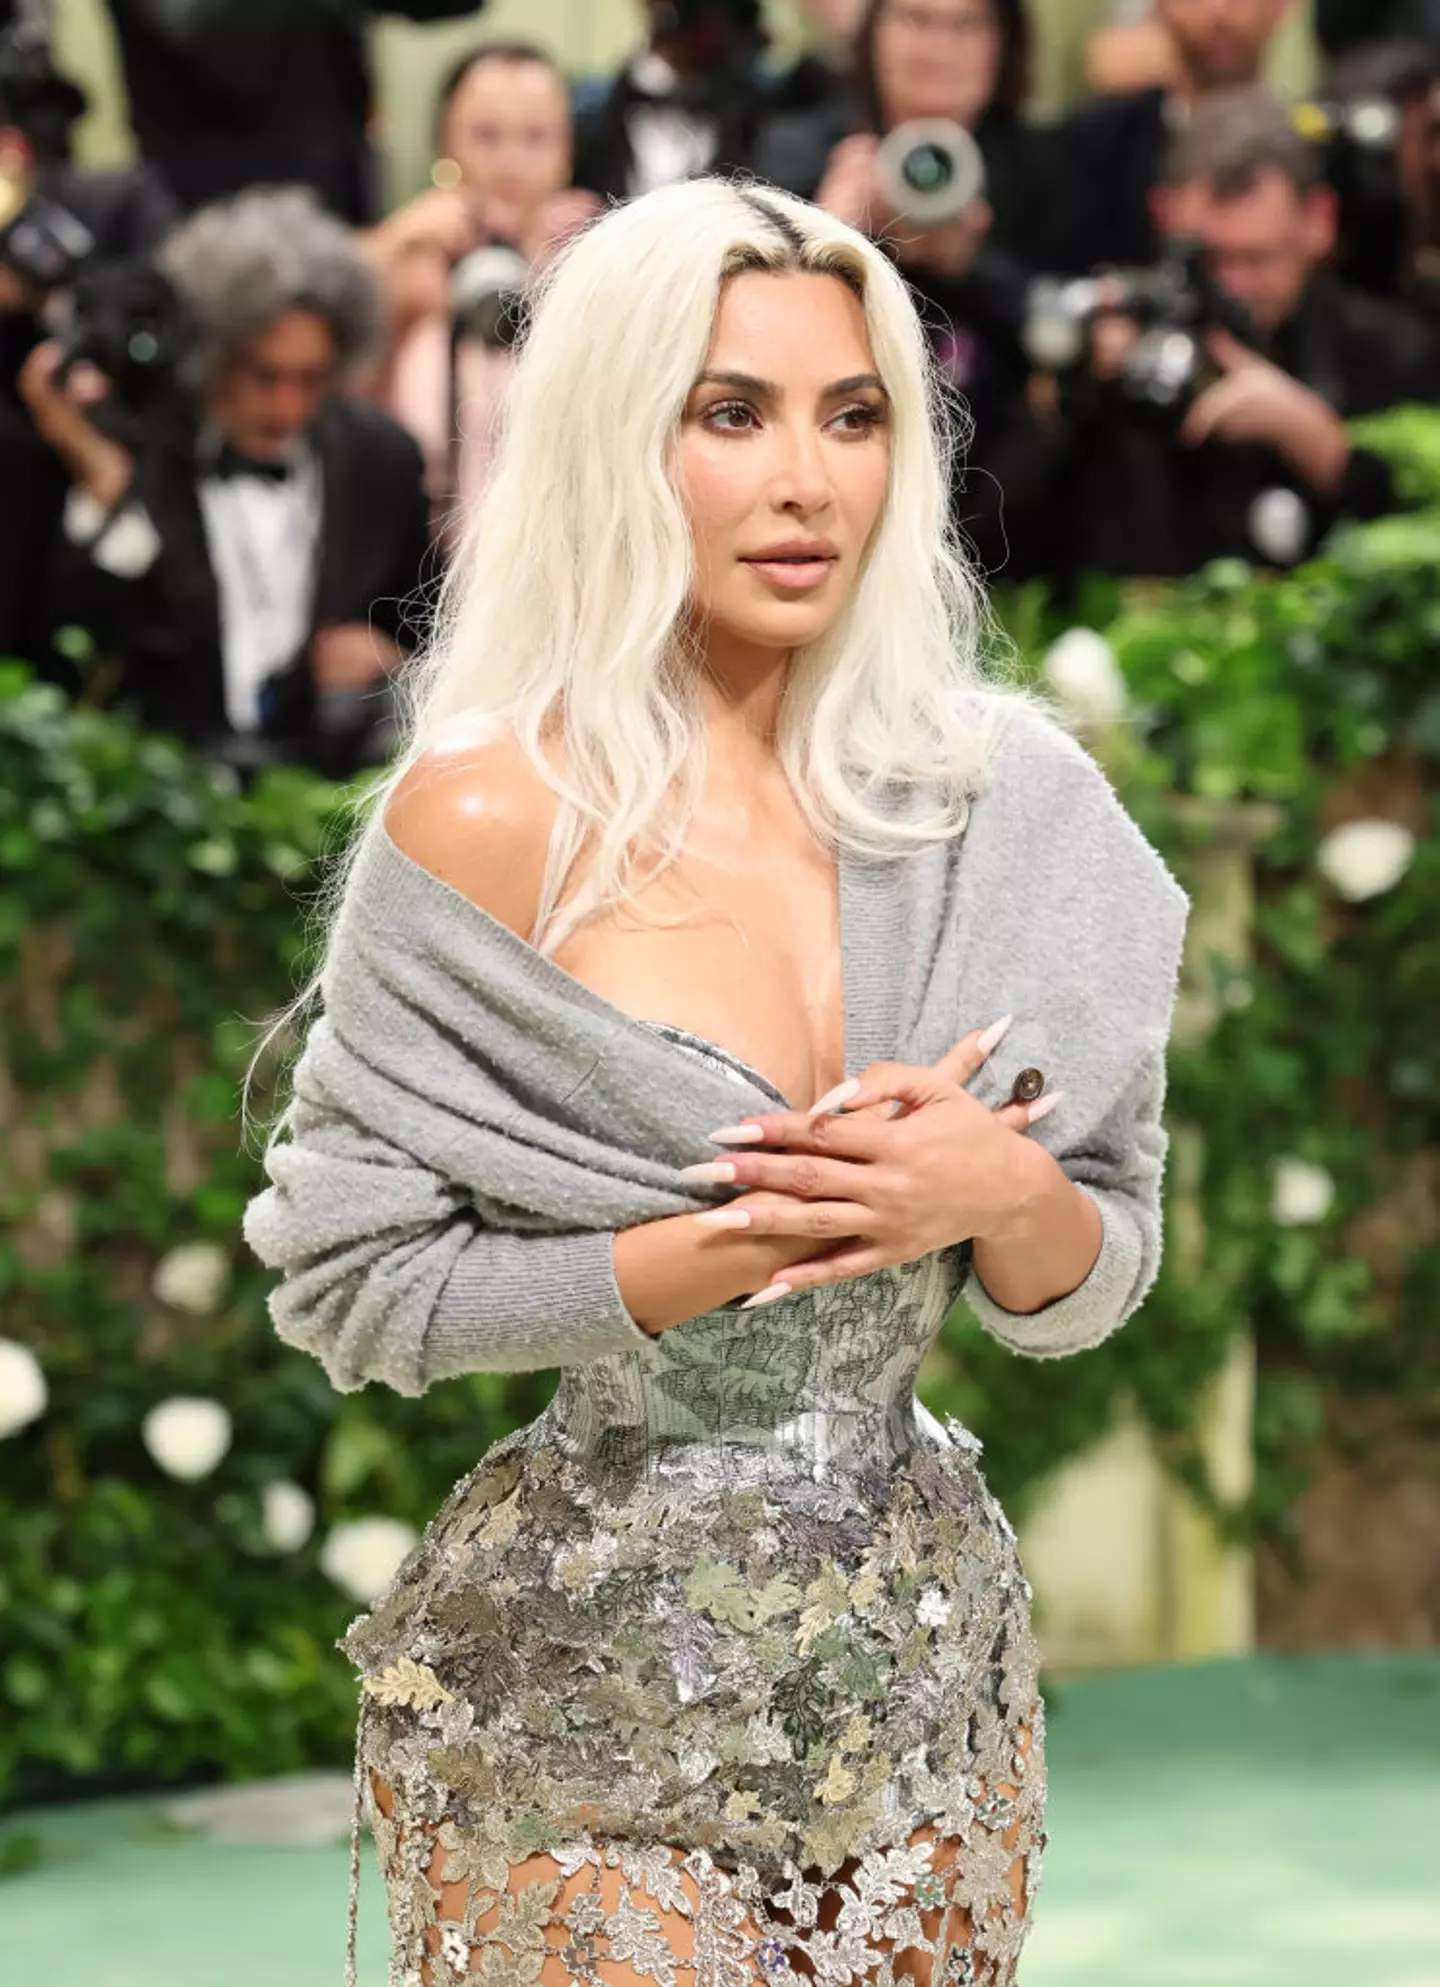 Kim Kardashian walked the red carpet in a dress with a corset.  (Aliah Anderson/Staff/Getty Images)